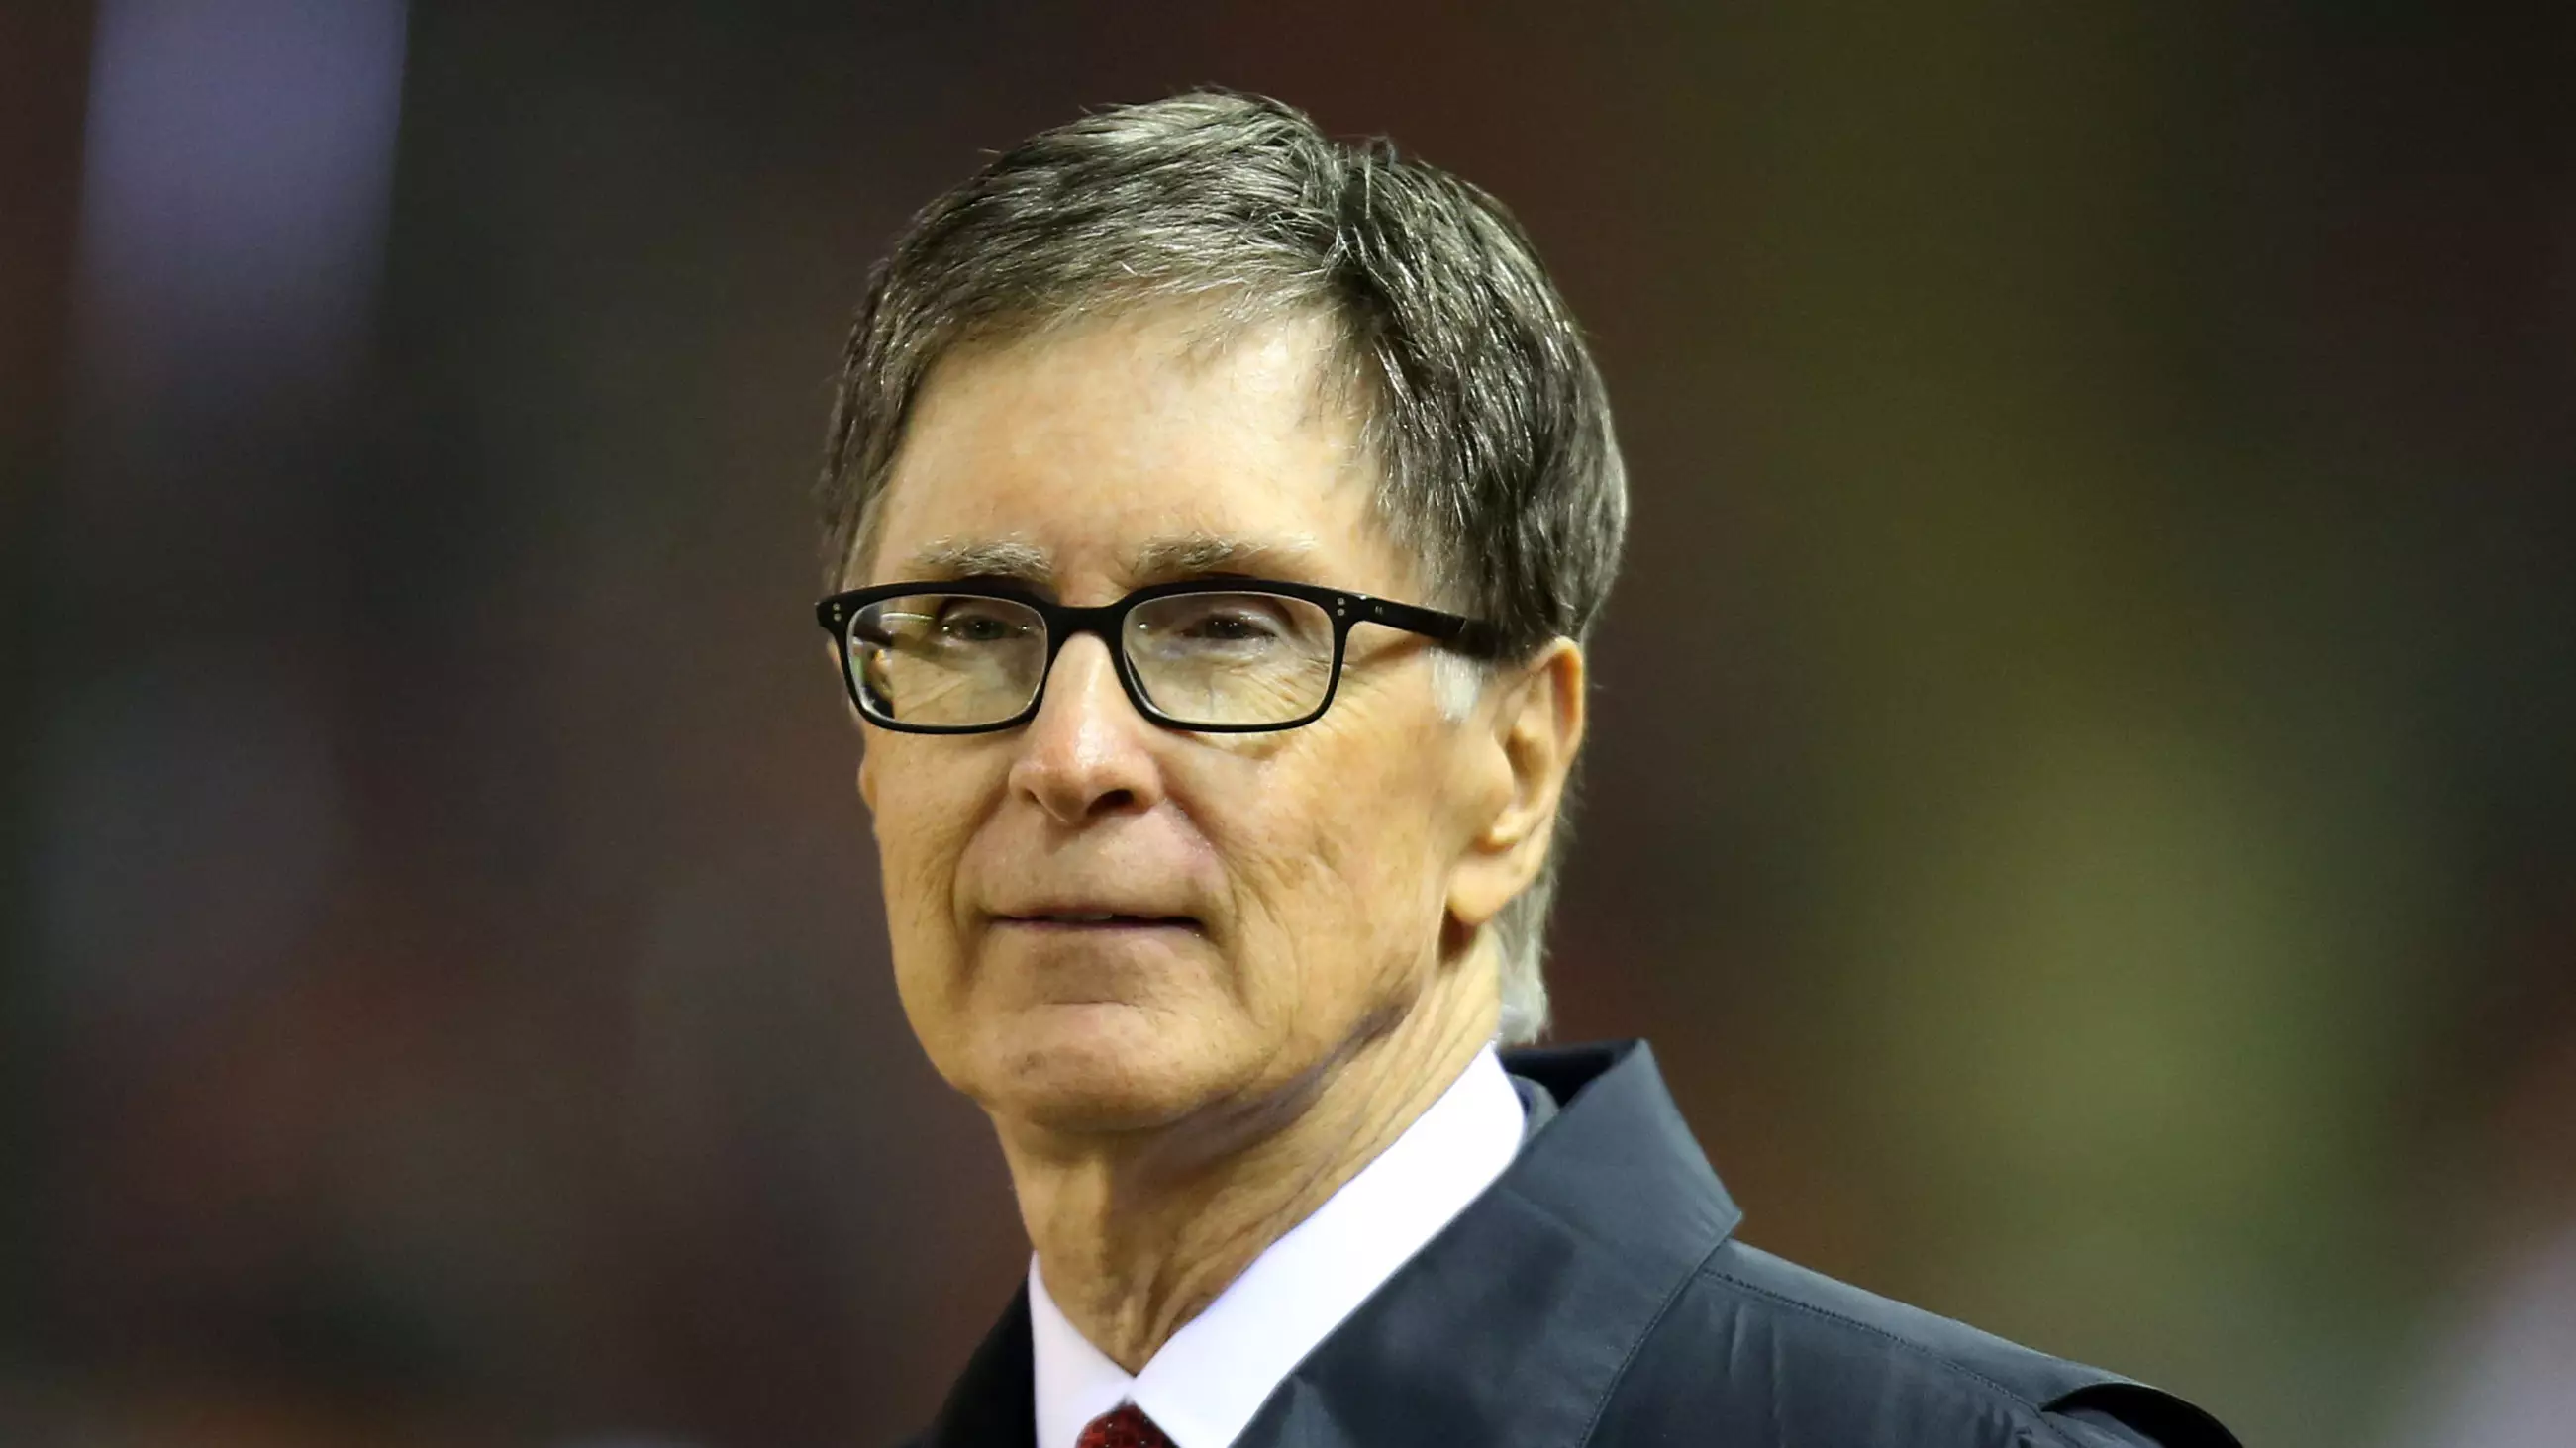 Liverpool's Owners FSG Have Rejected Bid Of Almost £3 Billion From Middle East